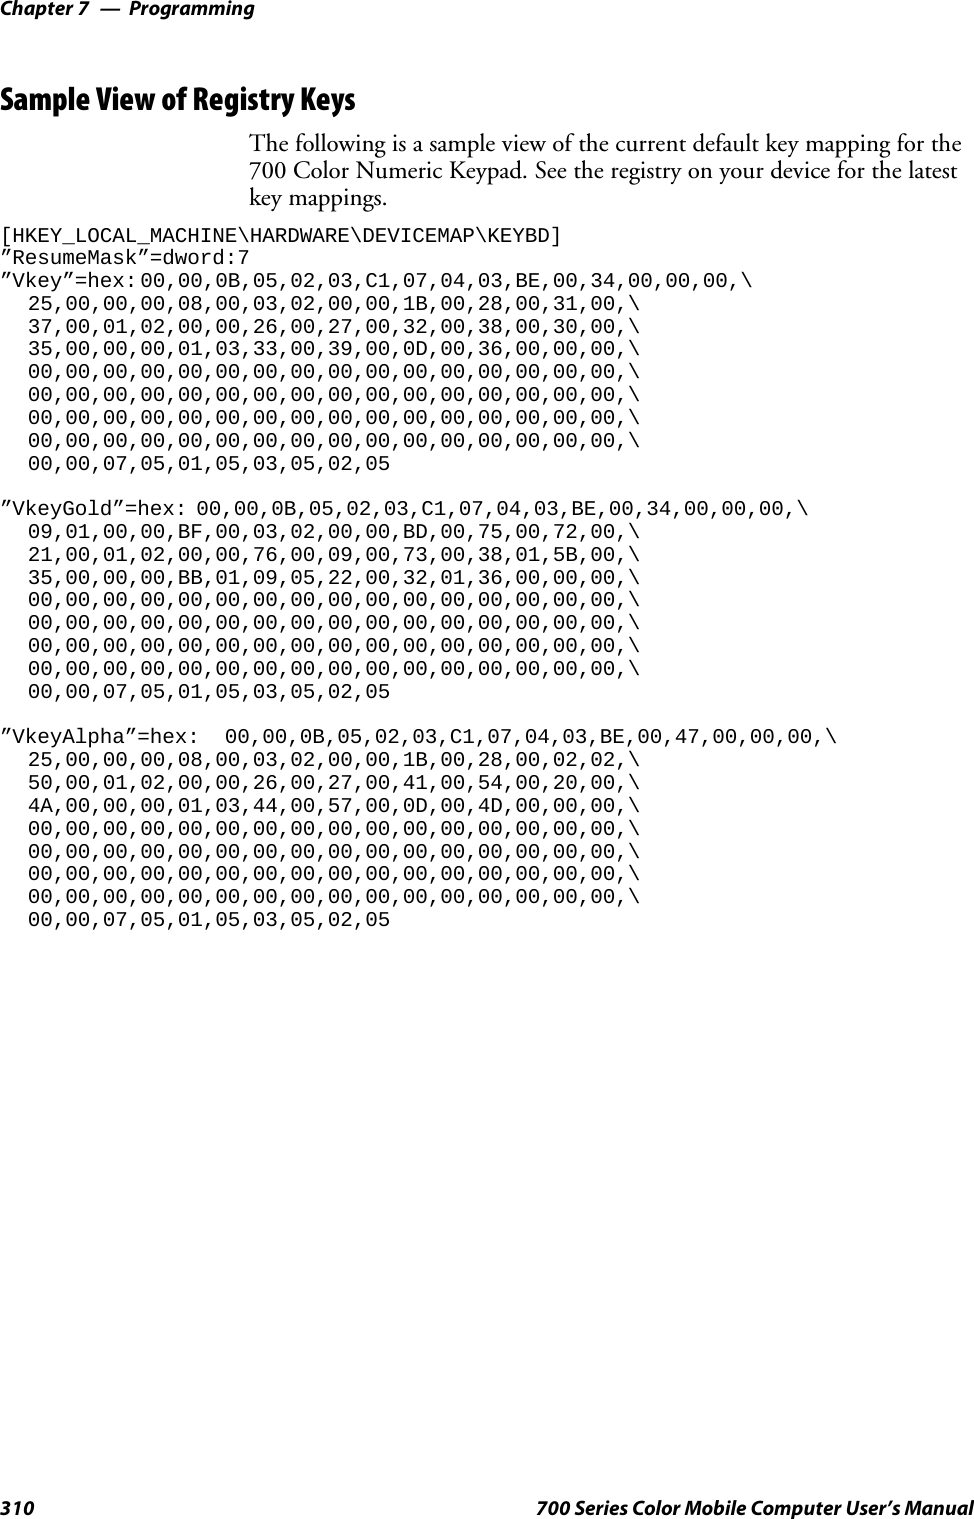 ProgrammingChapter —7310 700 Series Color Mobile Computer User’s ManualSample View of Registry KeysThe following is a sample view of the current default key mapping for the700 Color Numeric Keypad. See the registry on your device for the latestkey mappings.[HKEY_LOCAL_MACHINE\HARDWARE\DEVICEMAP\KEYBD]”ResumeMask”=dword:7”Vkey”=hex: 00,00,0B,05,02,03,C1,07,04,03,BE,00,34,00,00,00,\25,00,00,00,08,00,03,02,00,00,1B,00,28,00,31,00,\37,00,01,02,00,00,26,00,27,00,32,00,38,00,30,00,\35,00,00,00,01,03,33,00,39,00,0D,00,36,00,00,00,\00,00,00,00,00,00,00,00,00,00,00,00,00,00,00,00,\00,00,00,00,00,00,00,00,00,00,00,00,00,00,00,00,\00,00,00,00,00,00,00,00,00,00,00,00,00,00,00,00,\00,00,00,00,00,00,00,00,00,00,00,00,00,00,00,00,\00,00,07,05,01,05,03,05,02,05”VkeyGold”=hex: 00,00,0B,05,02,03,C1,07,04,03,BE,00,34,00,00,00,\09,01,00,00,BF,00,03,02,00,00,BD,00,75,00,72,00,\21,00,01,02,00,00,76,00,09,00,73,00,38,01,5B,00,\35,00,00,00,BB,01,09,05,22,00,32,01,36,00,00,00,\00,00,00,00,00,00,00,00,00,00,00,00,00,00,00,00,\00,00,00,00,00,00,00,00,00,00,00,00,00,00,00,00,\00,00,00,00,00,00,00,00,00,00,00,00,00,00,00,00,\00,00,00,00,00,00,00,00,00,00,00,00,00,00,00,00,\00,00,07,05,01,05,03,05,02,05”VkeyAlpha”=hex: 00,00,0B,05,02,03,C1,07,04,03,BE,00,47,00,00,00,\25,00,00,00,08,00,03,02,00,00,1B,00,28,00,02,02,\50,00,01,02,00,00,26,00,27,00,41,00,54,00,20,00,\4A,00,00,00,01,03,44,00,57,00,0D,00,4D,00,00,00,\00,00,00,00,00,00,00,00,00,00,00,00,00,00,00,00,\00,00,00,00,00,00,00,00,00,00,00,00,00,00,00,00,\00,00,00,00,00,00,00,00,00,00,00,00,00,00,00,00,\00,00,00,00,00,00,00,00,00,00,00,00,00,00,00,00,\00,00,07,05,01,05,03,05,02,05